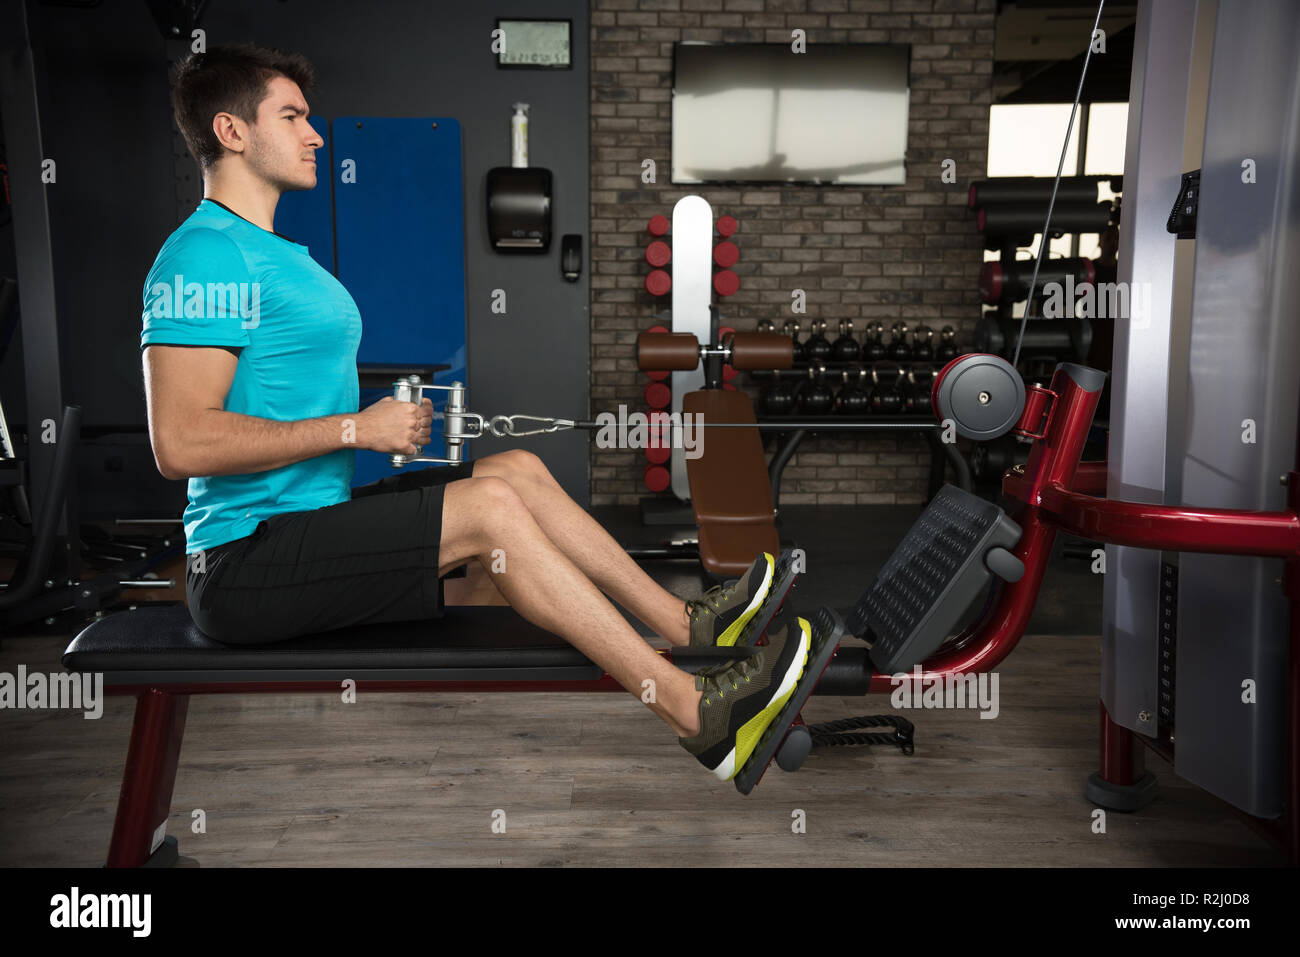 Man using a rowing machine in a gym Stock Photo - Alamy